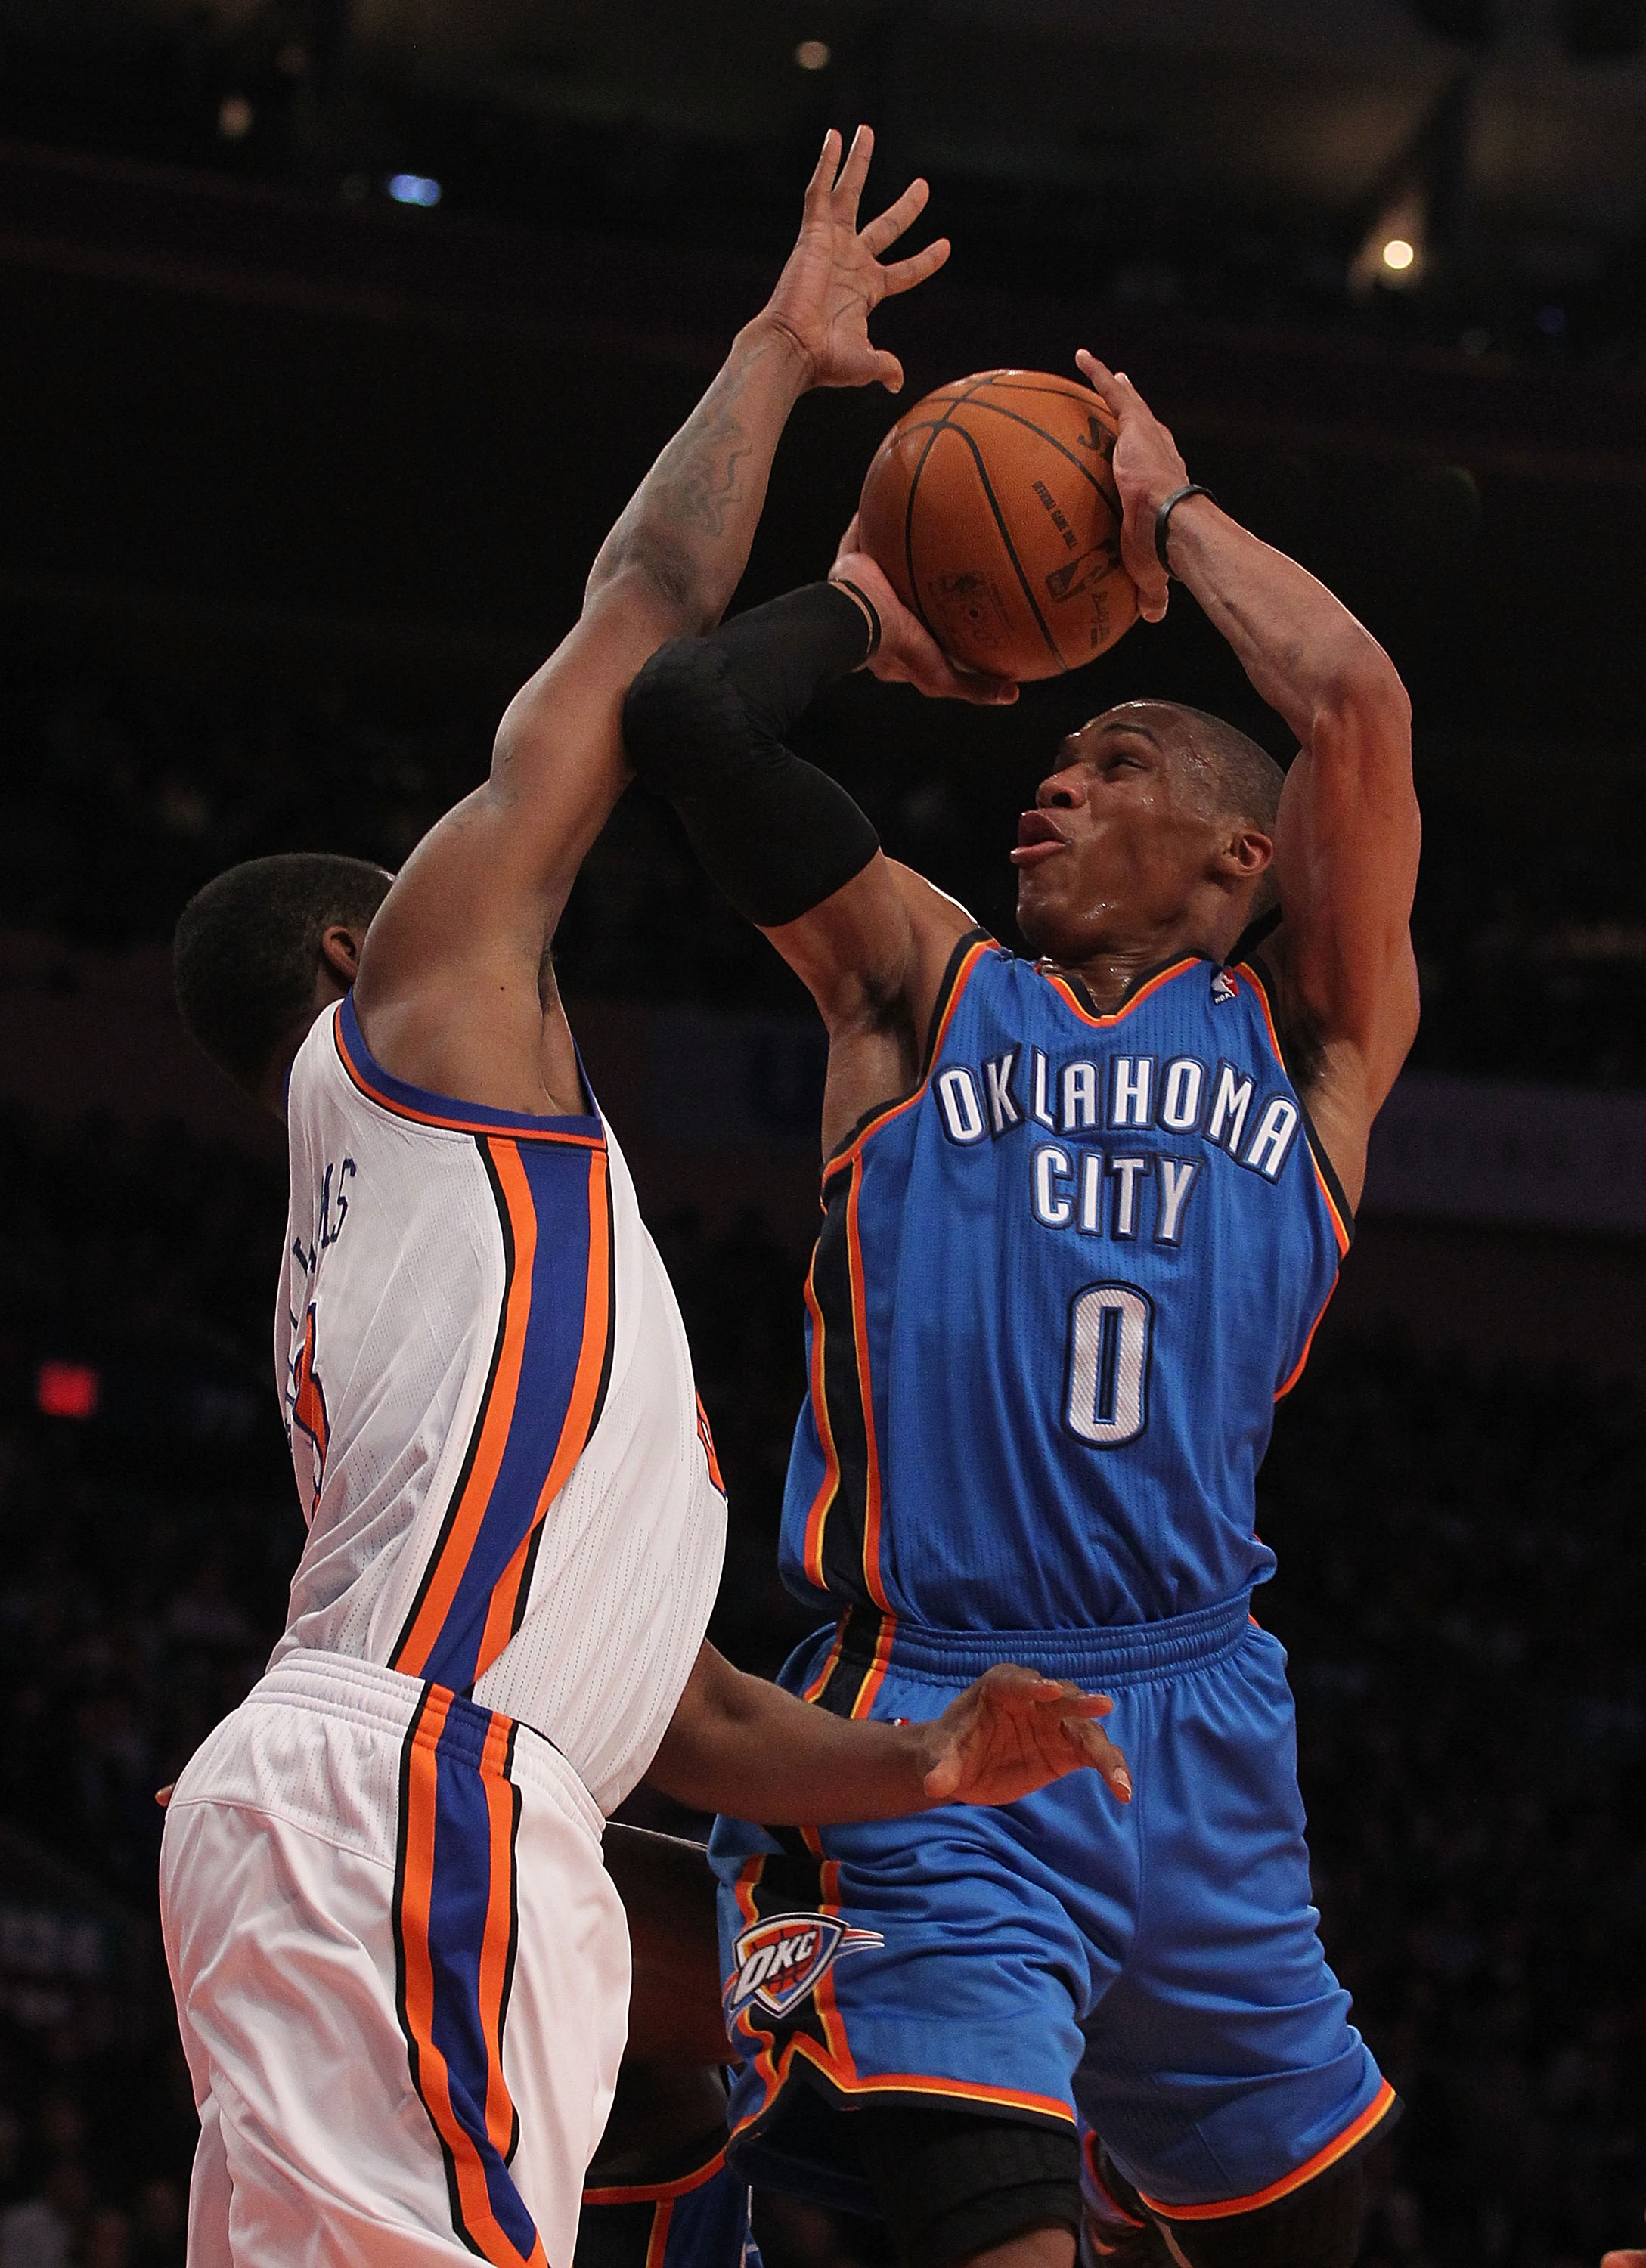 NEW YORK - DECEMBER 22:  Russell Westbrook #0 of the Oklahoma City Thunder in action against the New York Knicks at Madison Square Garden on December 22, 2010 in New York, New York.   NOTE TO USER: User expressly acknowledges and agrees that, by downloadi